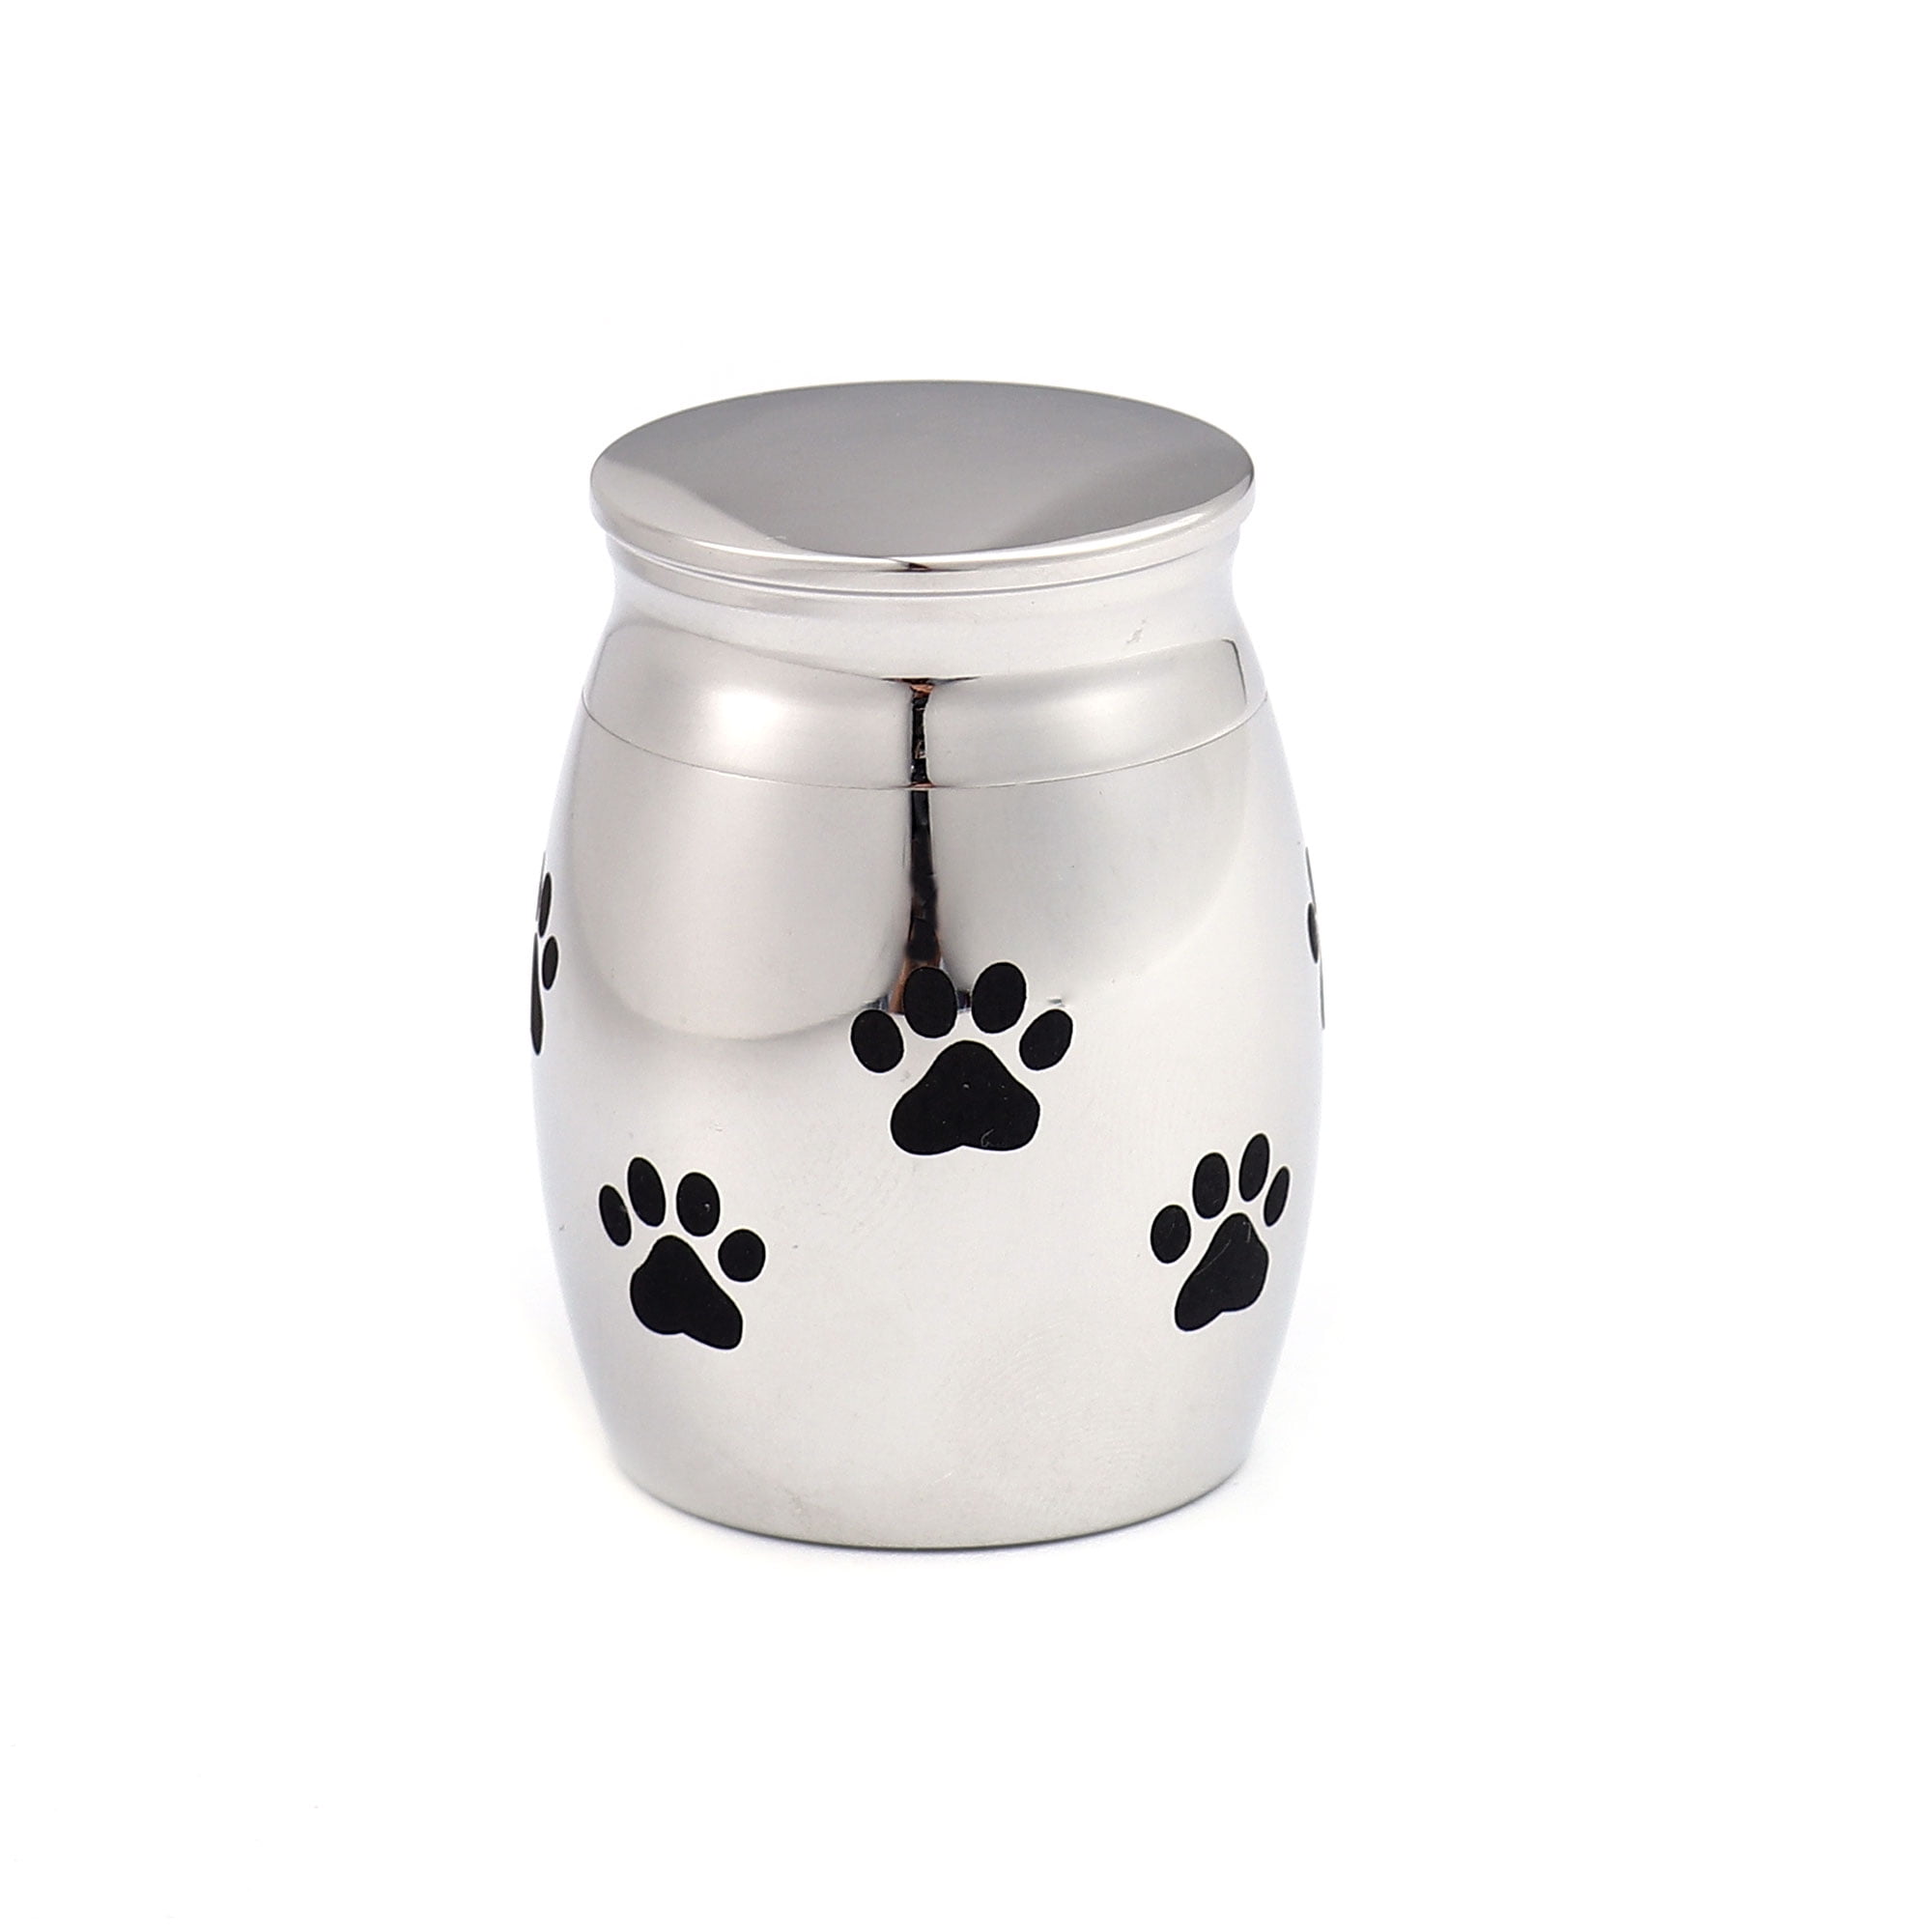 Urn for Pet Dog Ashes Cremation Memorial Small Keepsake Ash Container Jar 